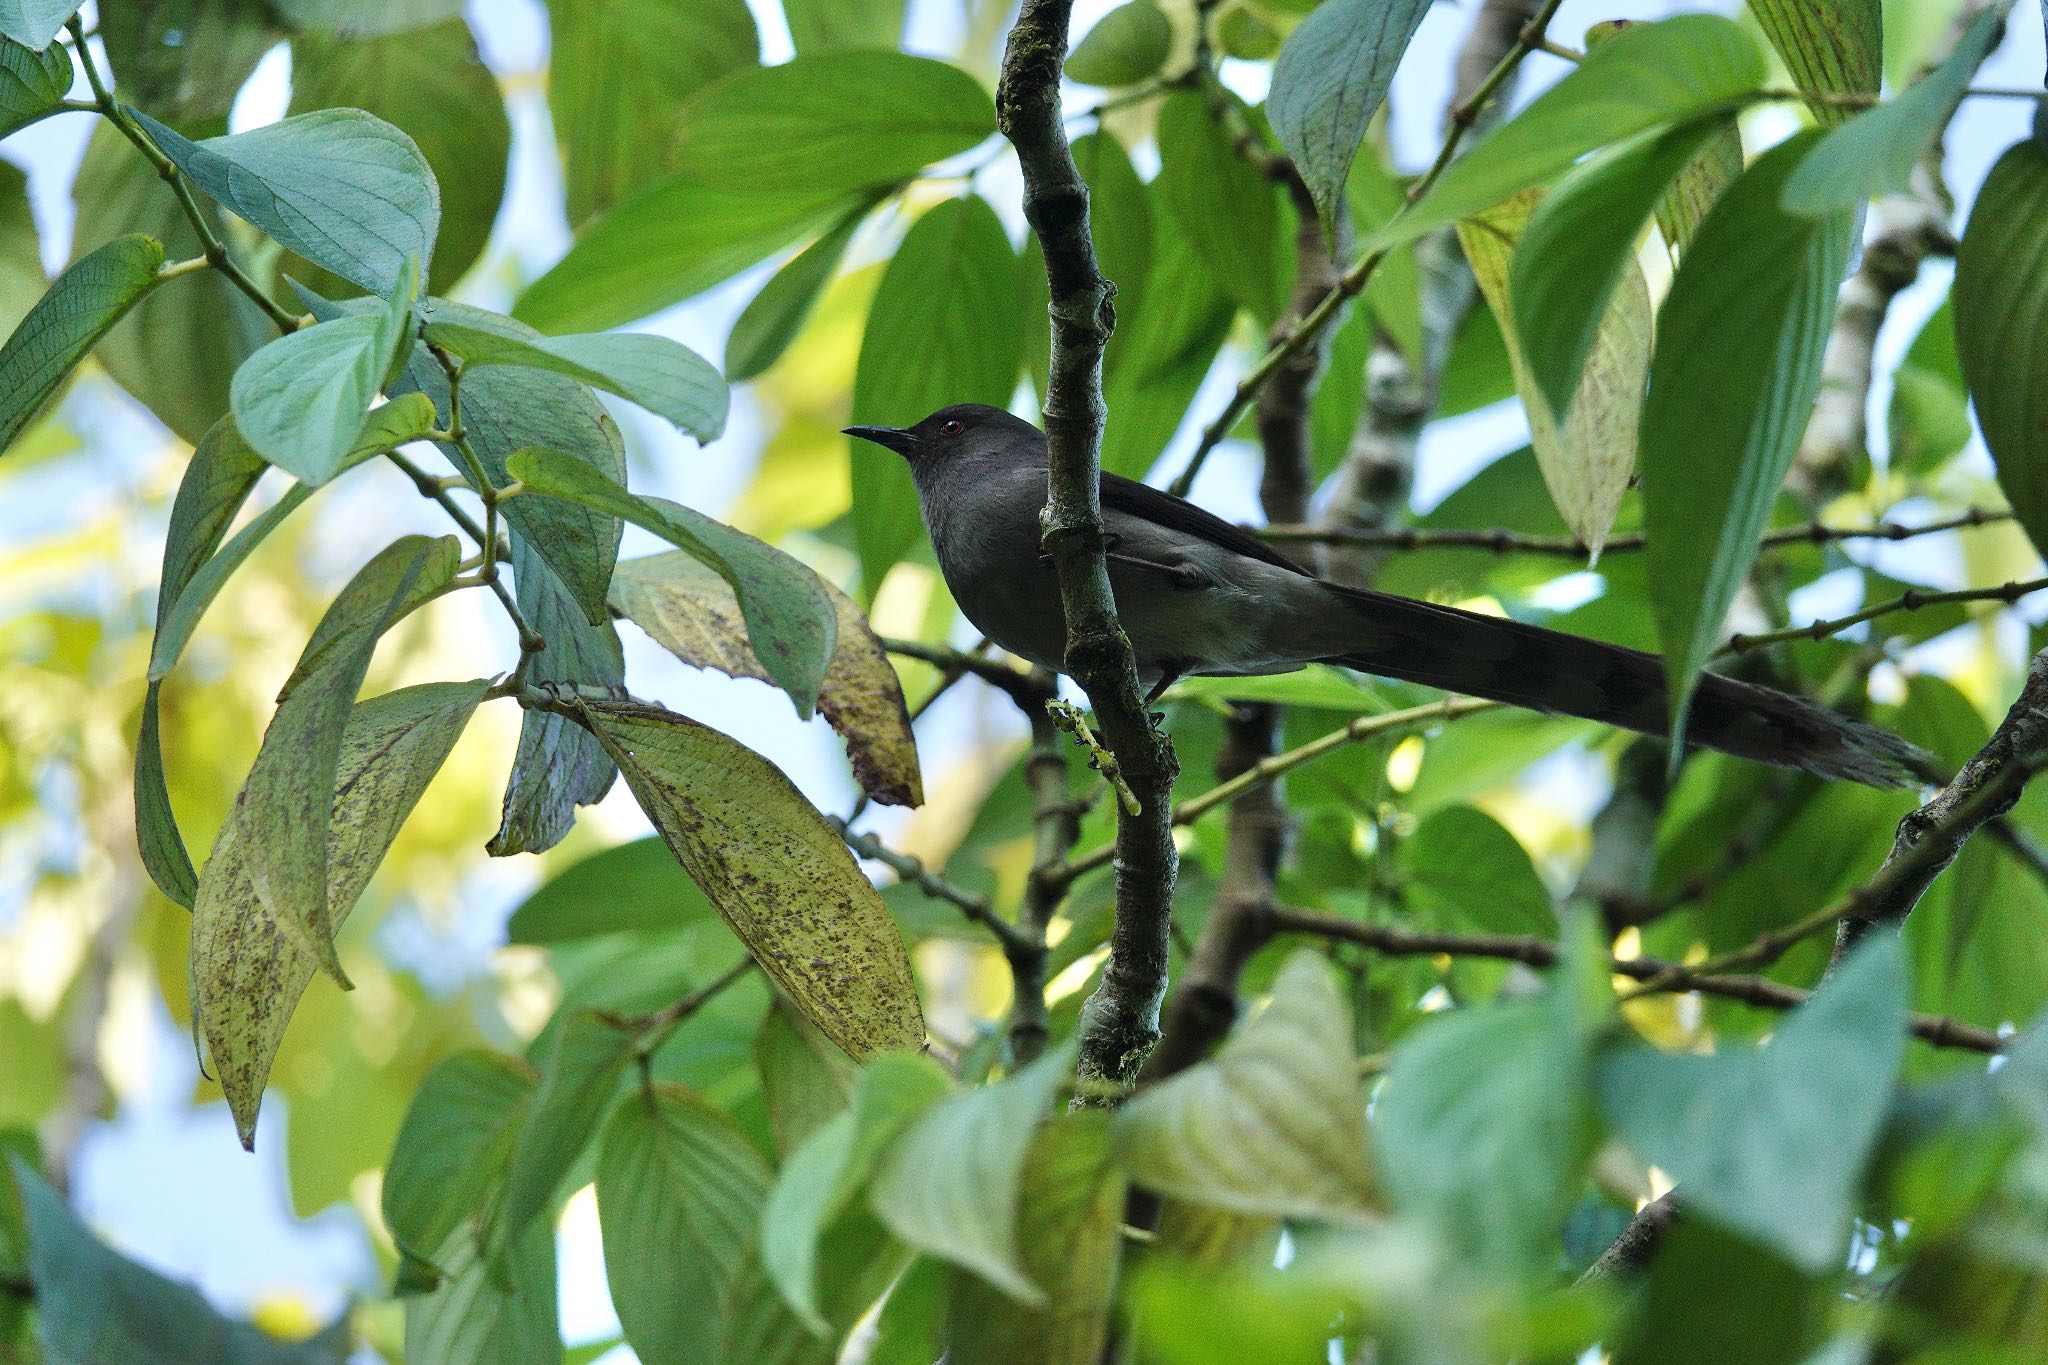 Photo of Long-tailed Sibia at Fraser's Hill by のどか